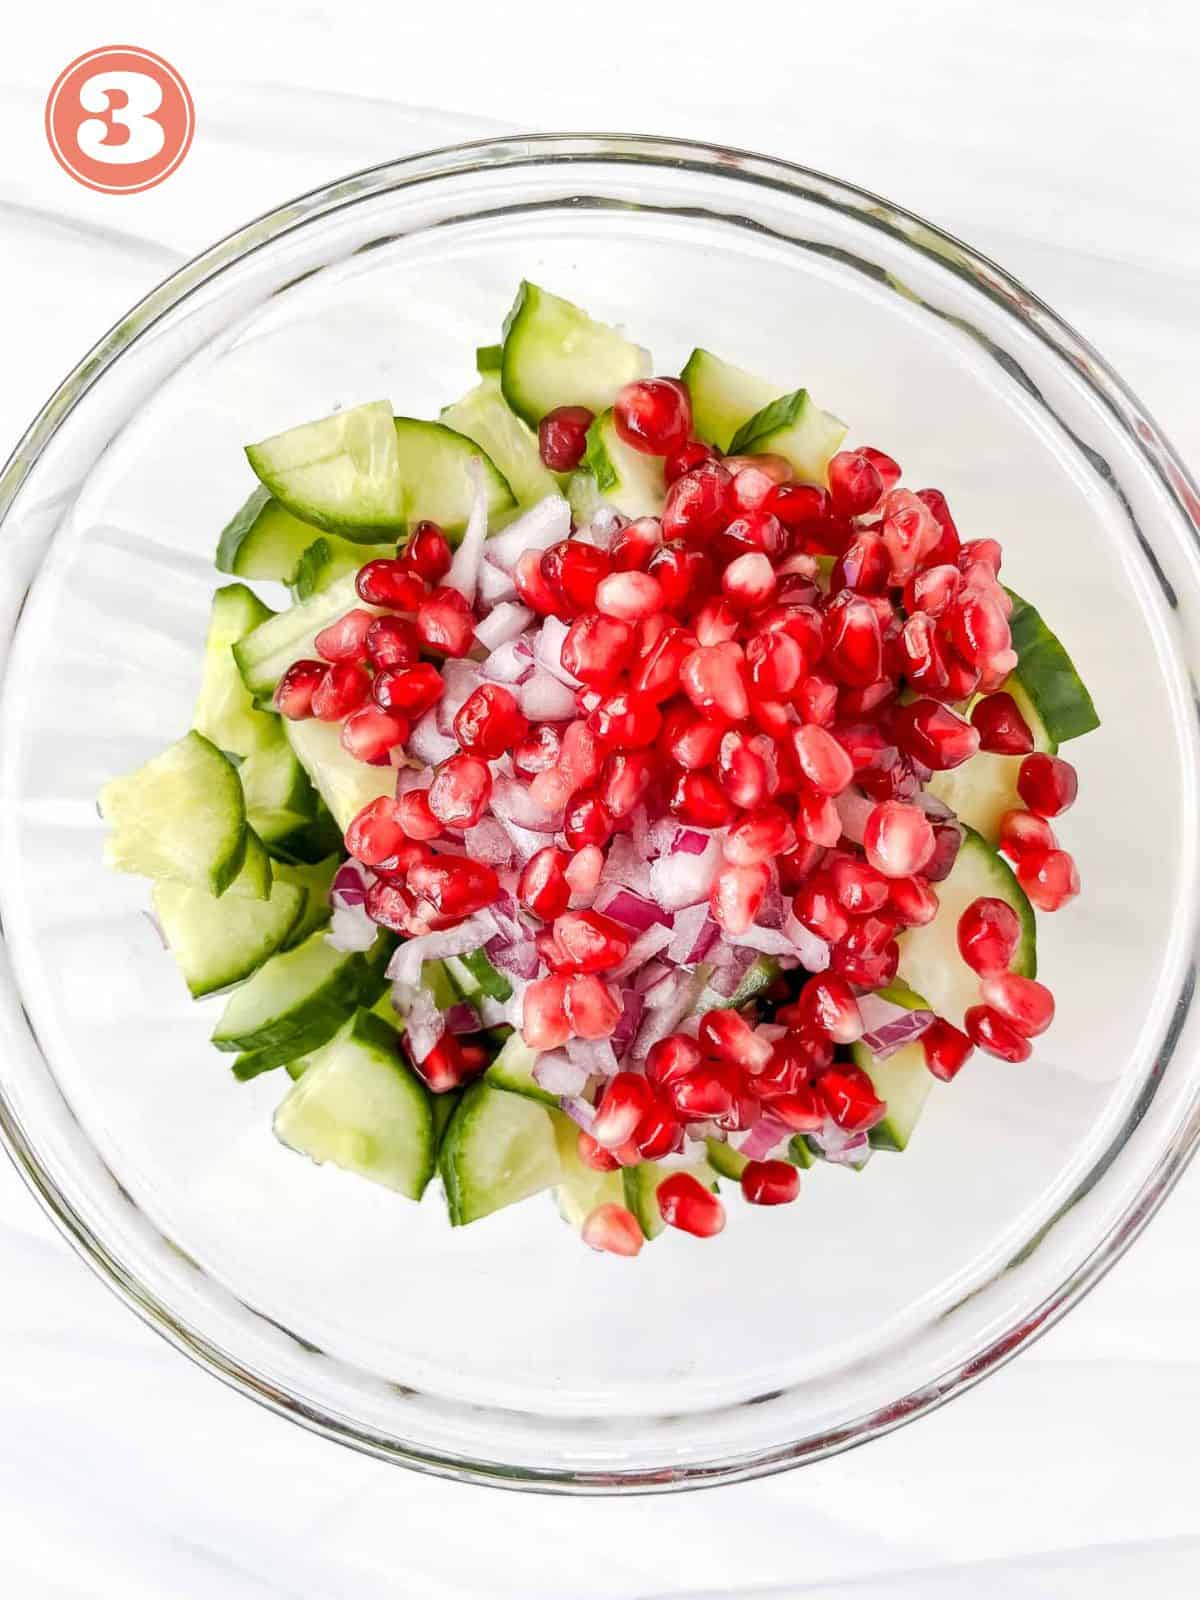 English cucumber and pomegranate seeds in a glass bowl labelled number three.